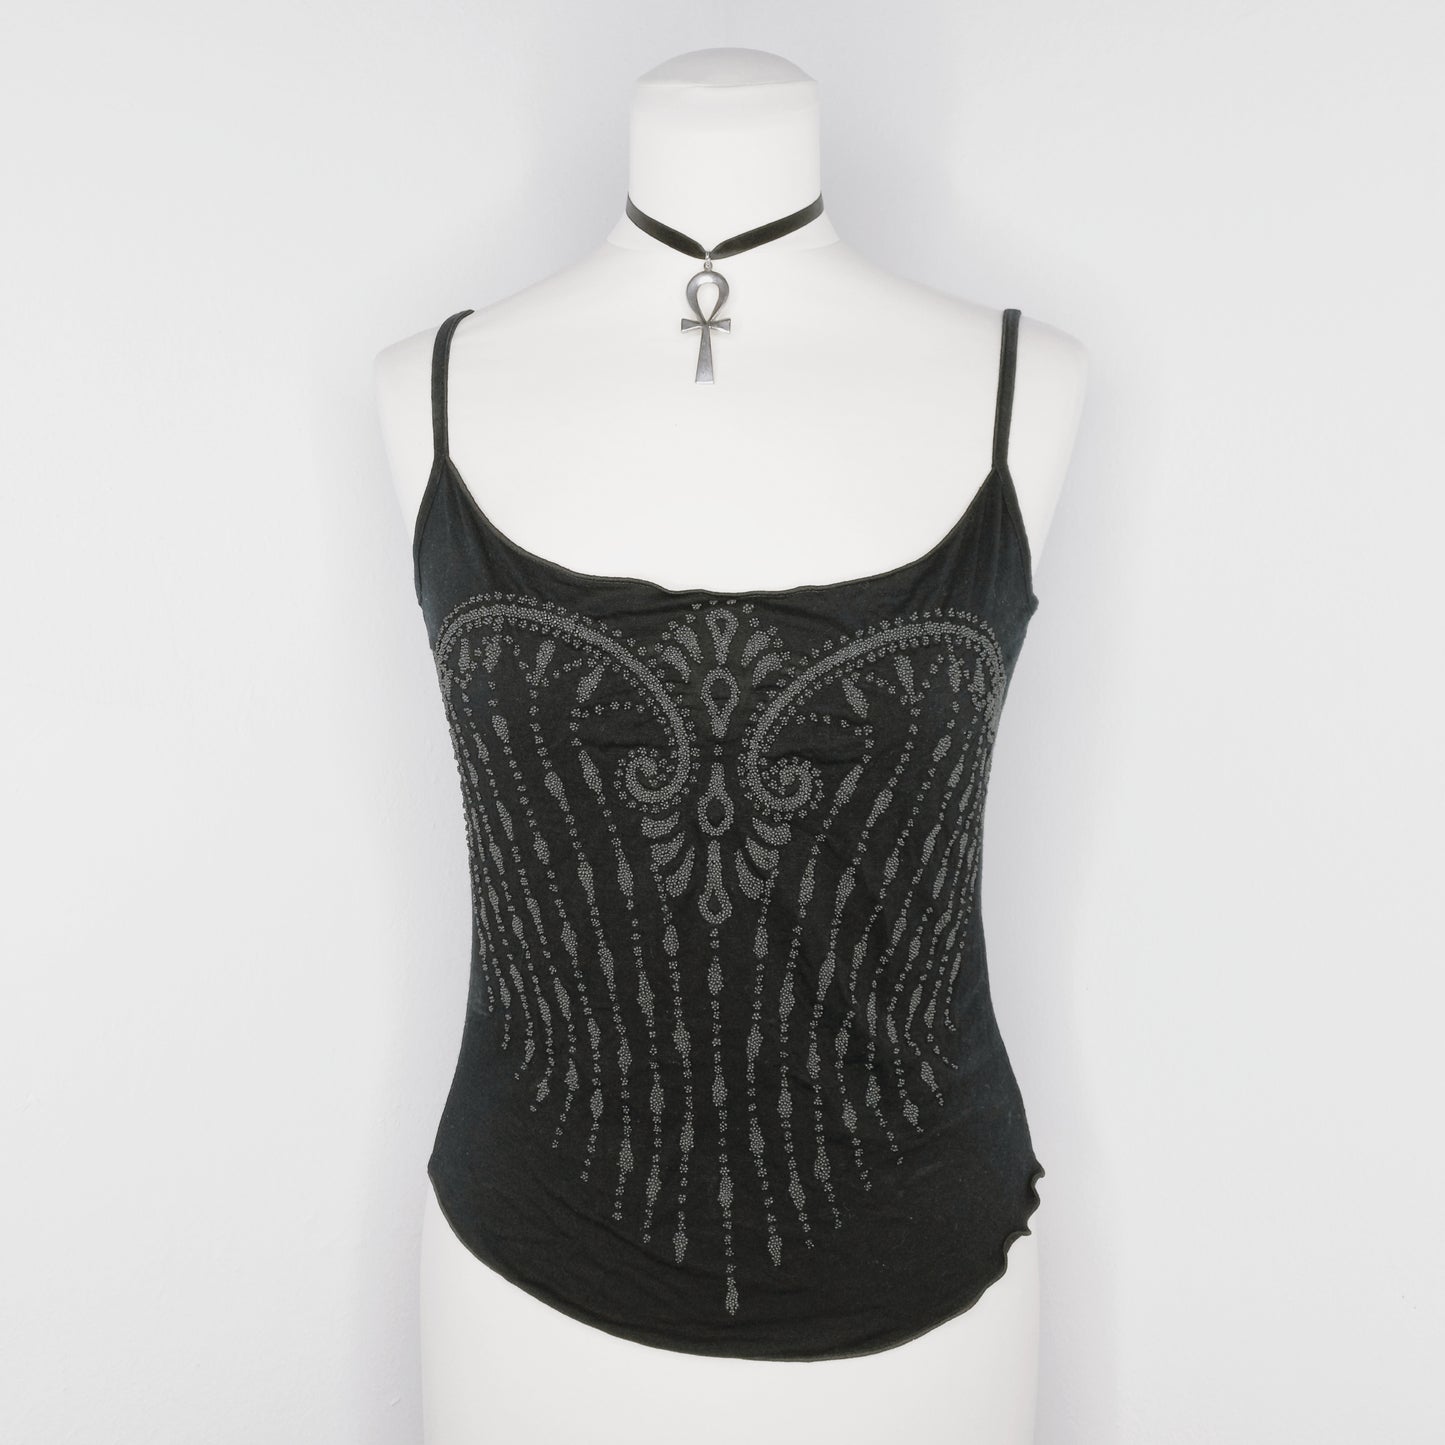 Corset Patterned Top - S/M